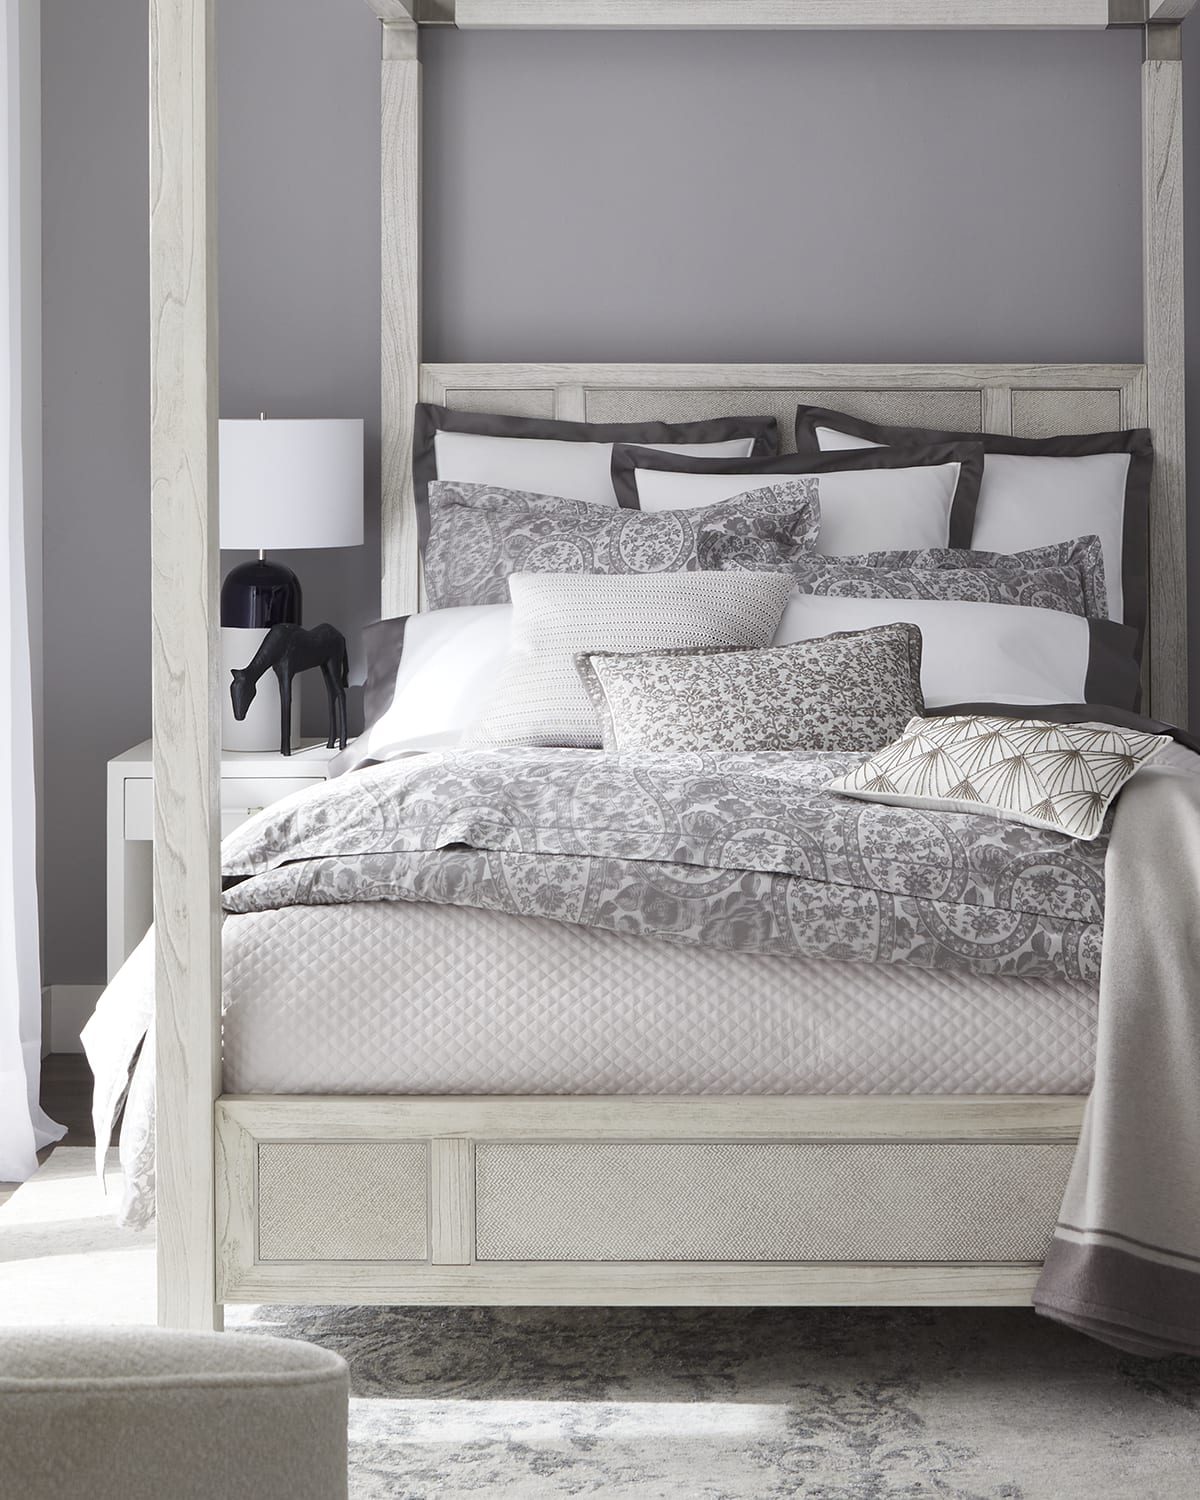 Camile Sage Chambray Bedding Collection | Neiman Marcus